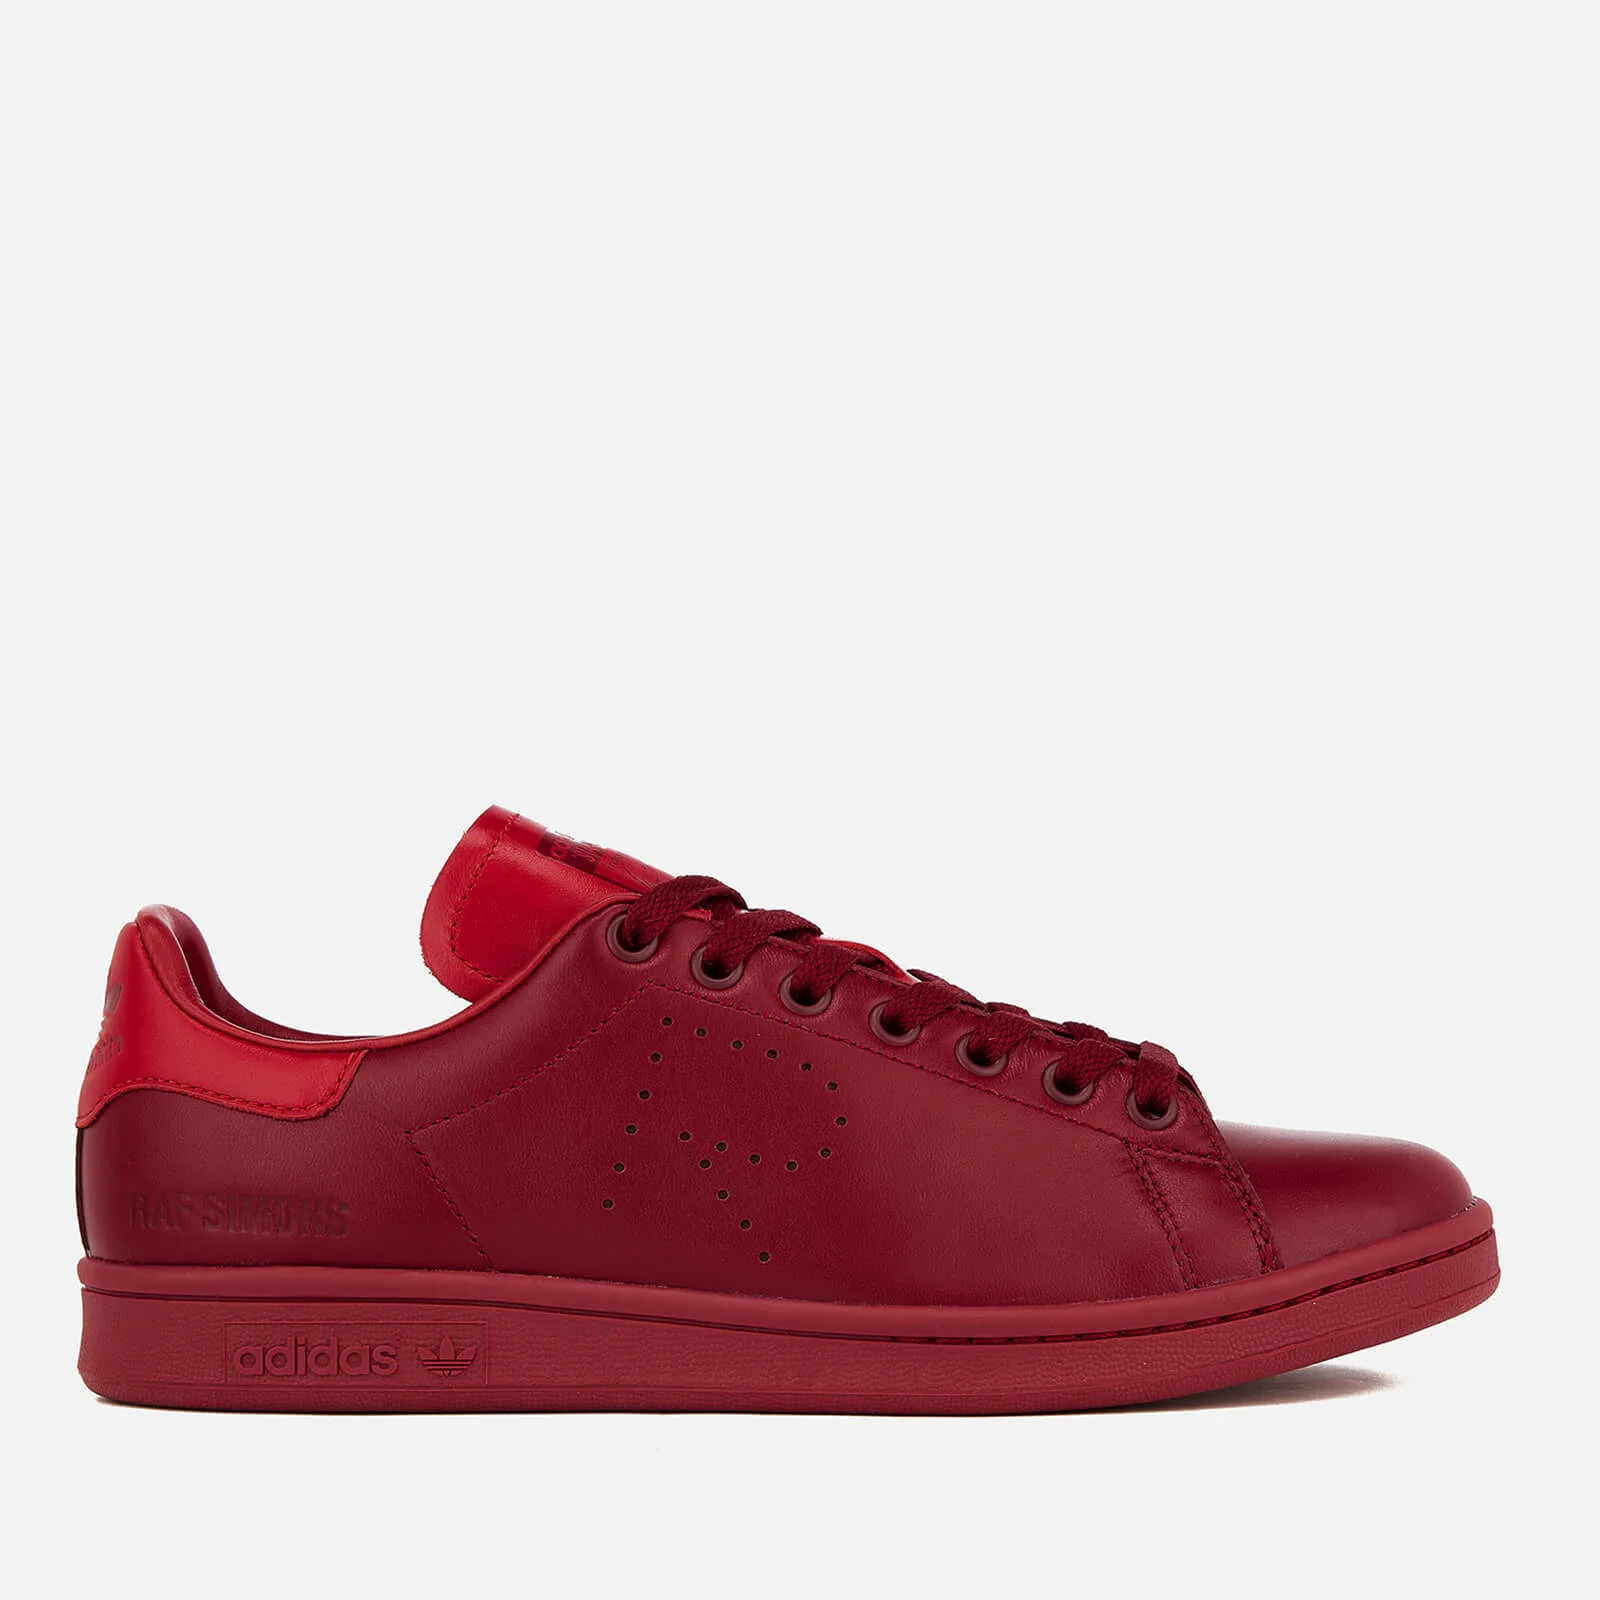 adidas by Raf Simons Men's Stan Smith Trainers - Burgundy Image 1